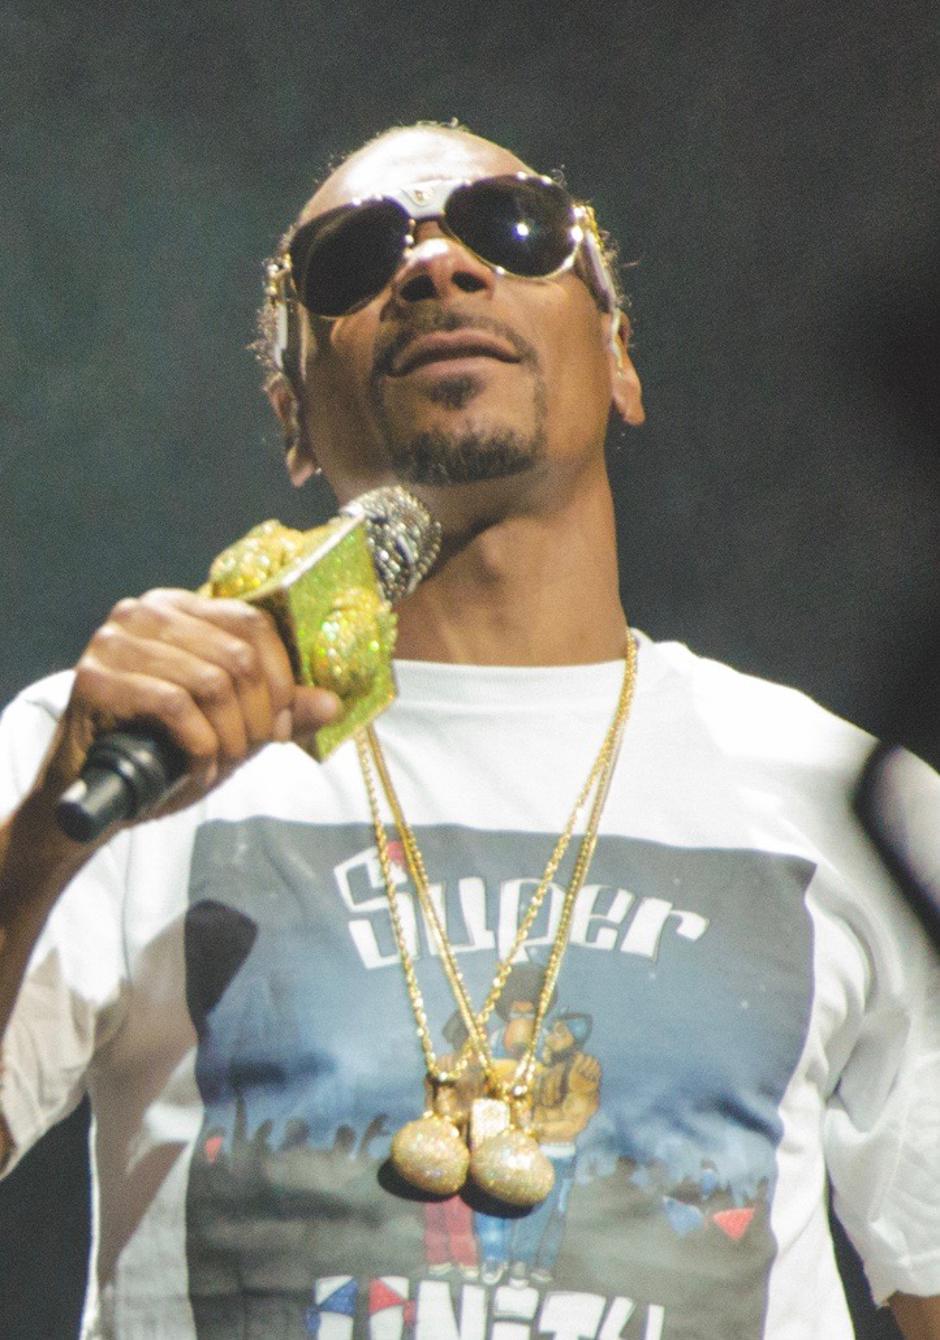 Snoop Dogg | Author: Wikipedia Commons